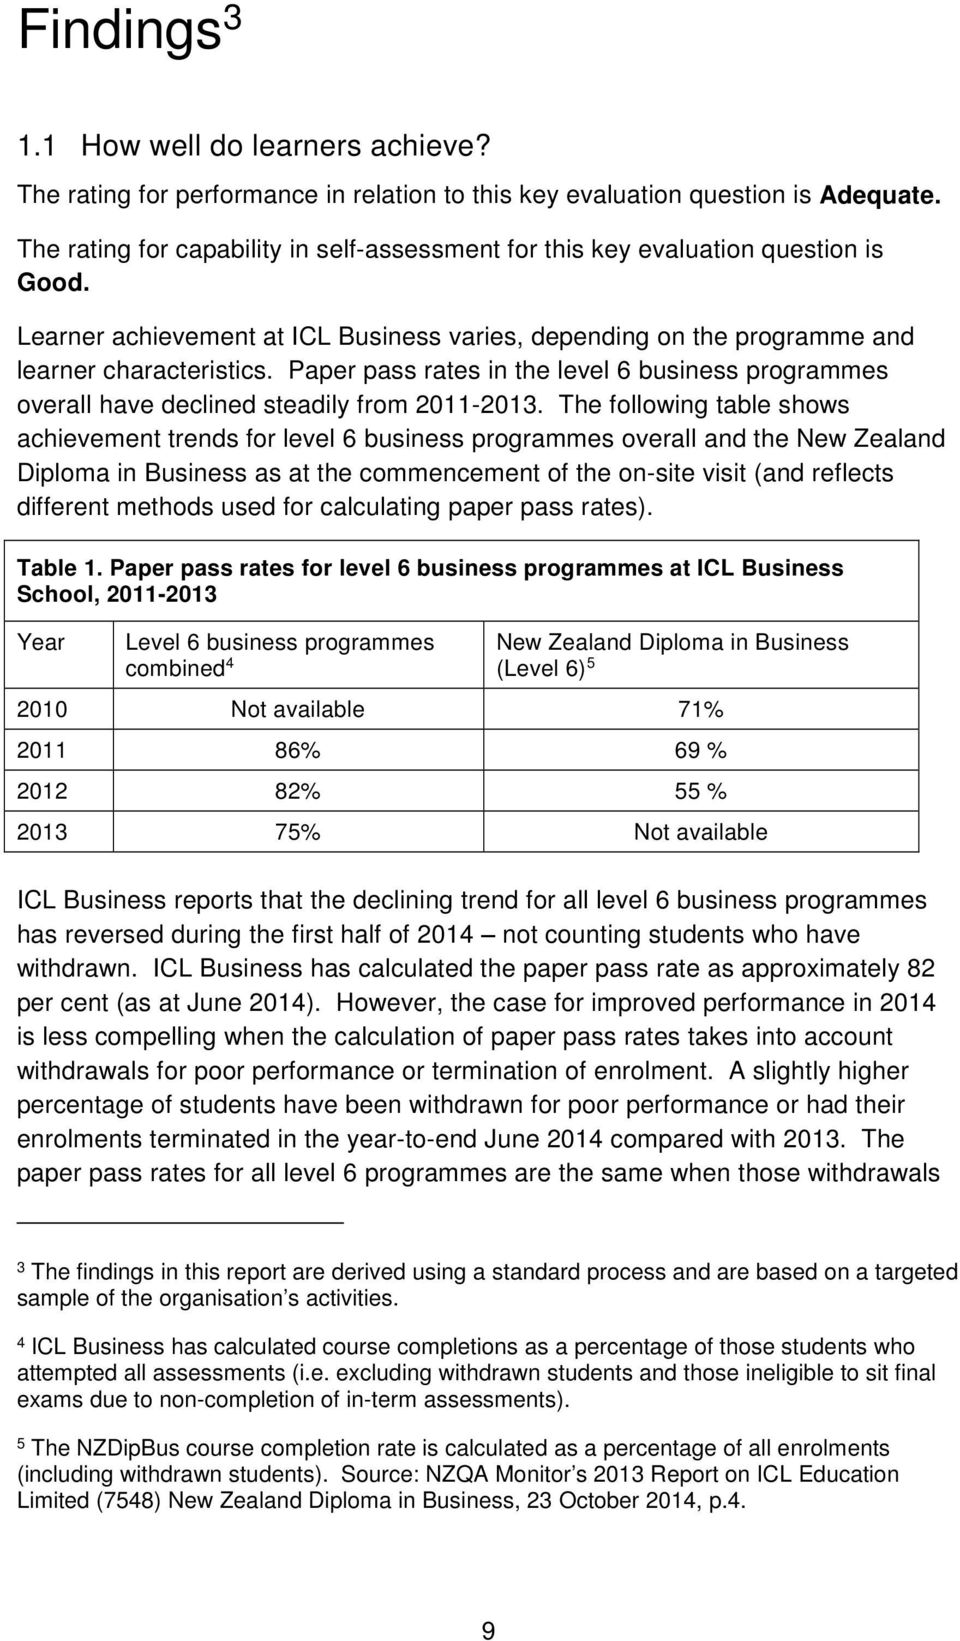 Paper pass rates in the level 6 business programmes overall have declined steadily from 2011-2013.